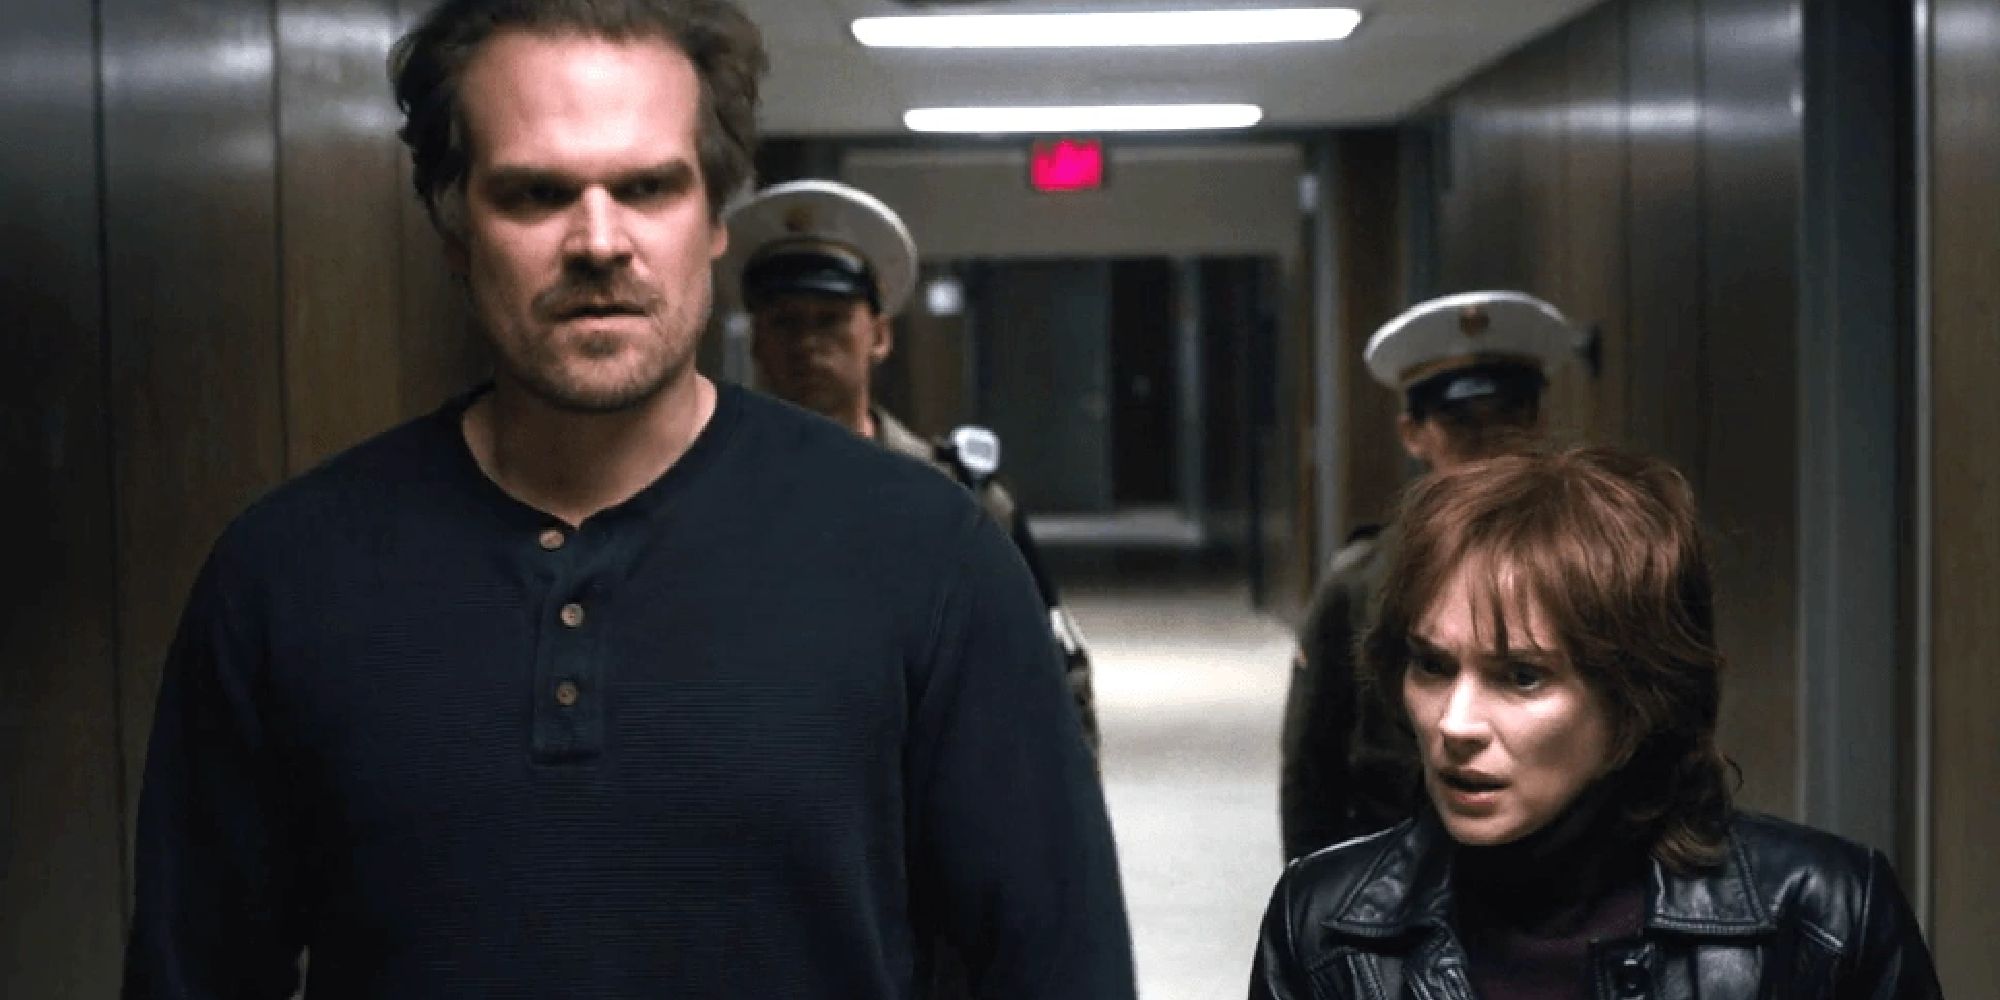 Joyce and Hopper being led down a hallway by security guards in season 1